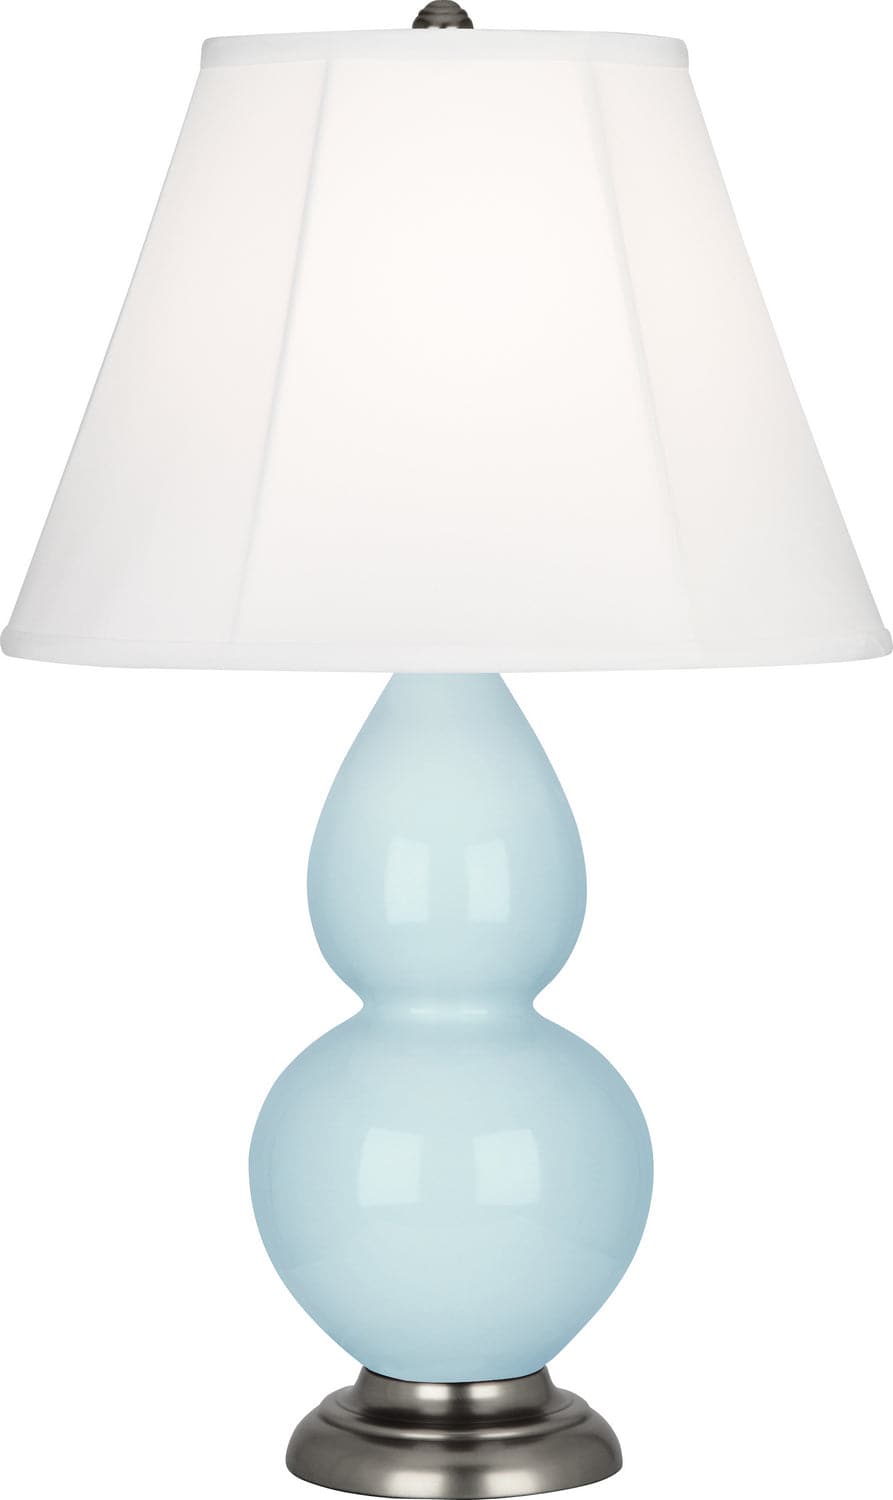 Robert Abbey - 1696 - One Light Accent Lamp - Small Double Gourd - Baby Blue Glazed w/Antique Silver